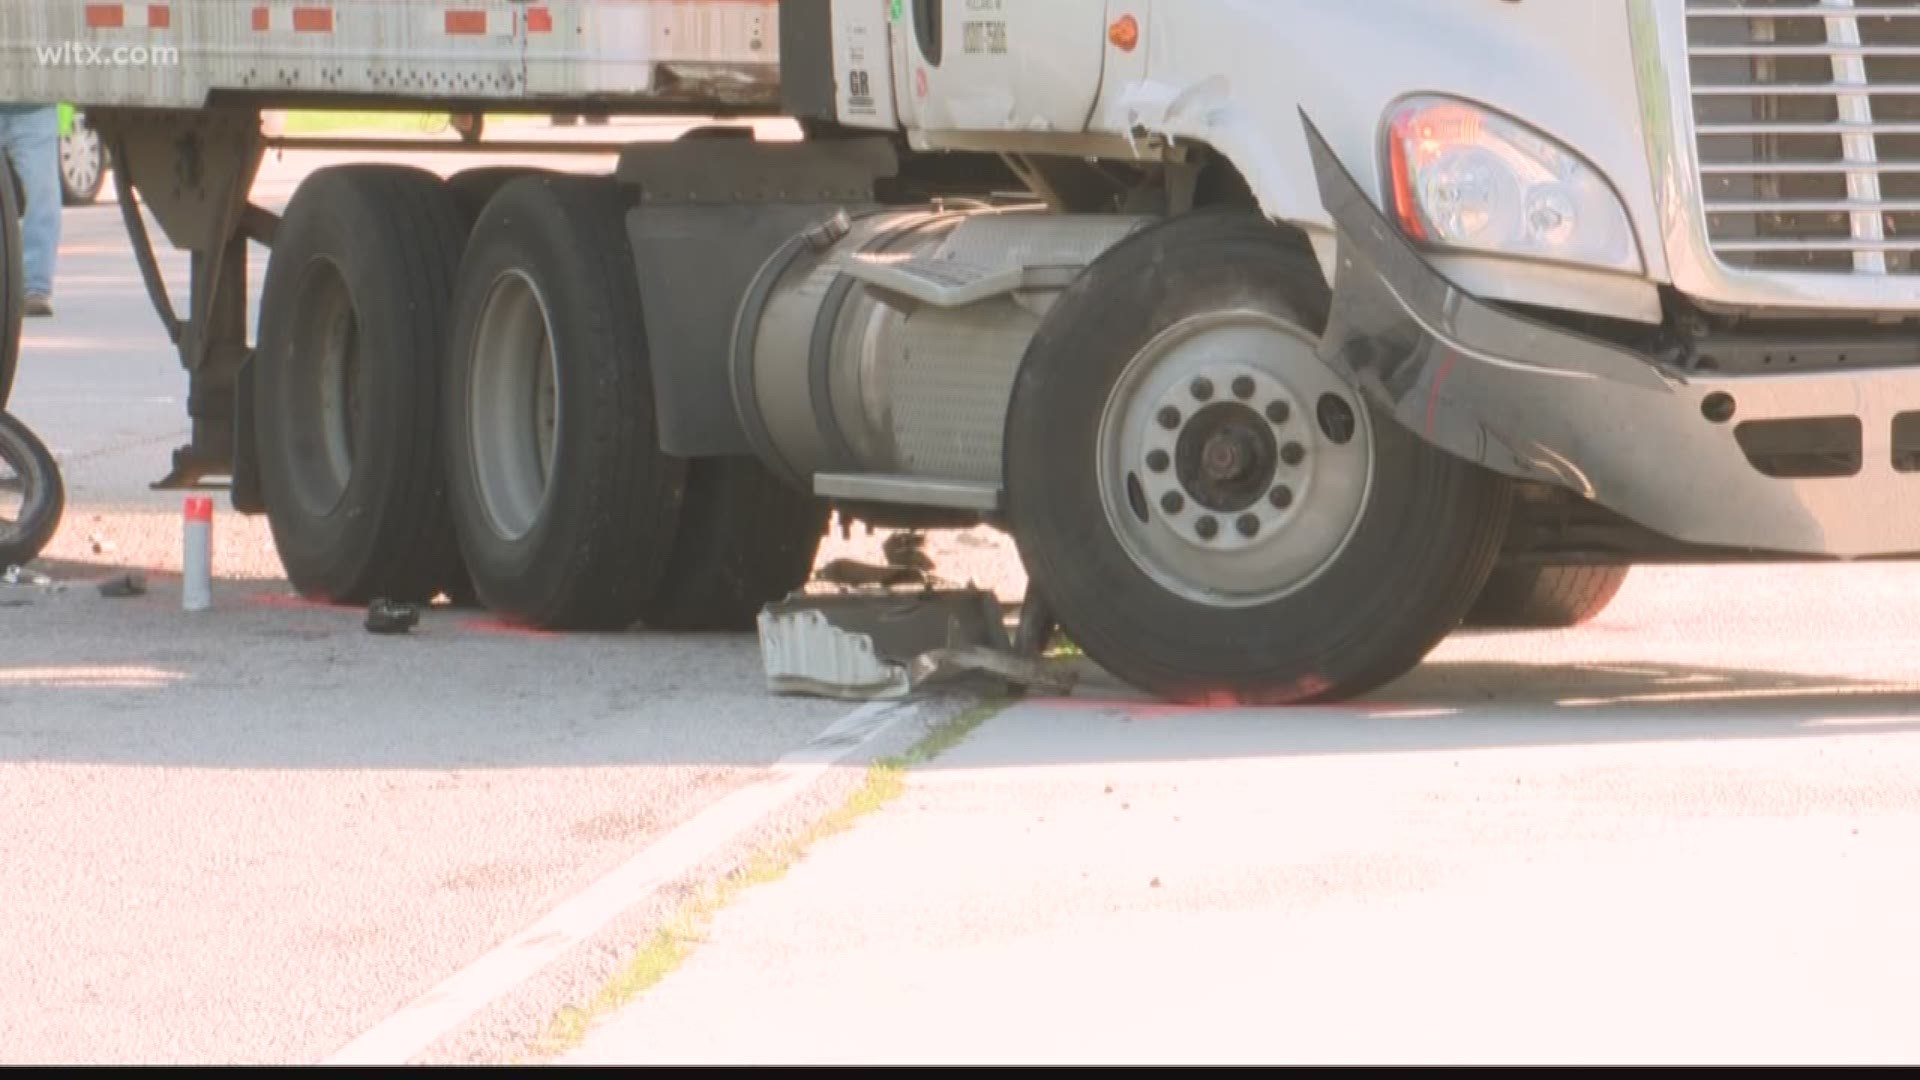 Troopers say the victim, identified as 26-year-old Wesley Grant Hutto, collided with a turning tractor trailer on Charleston Highway.